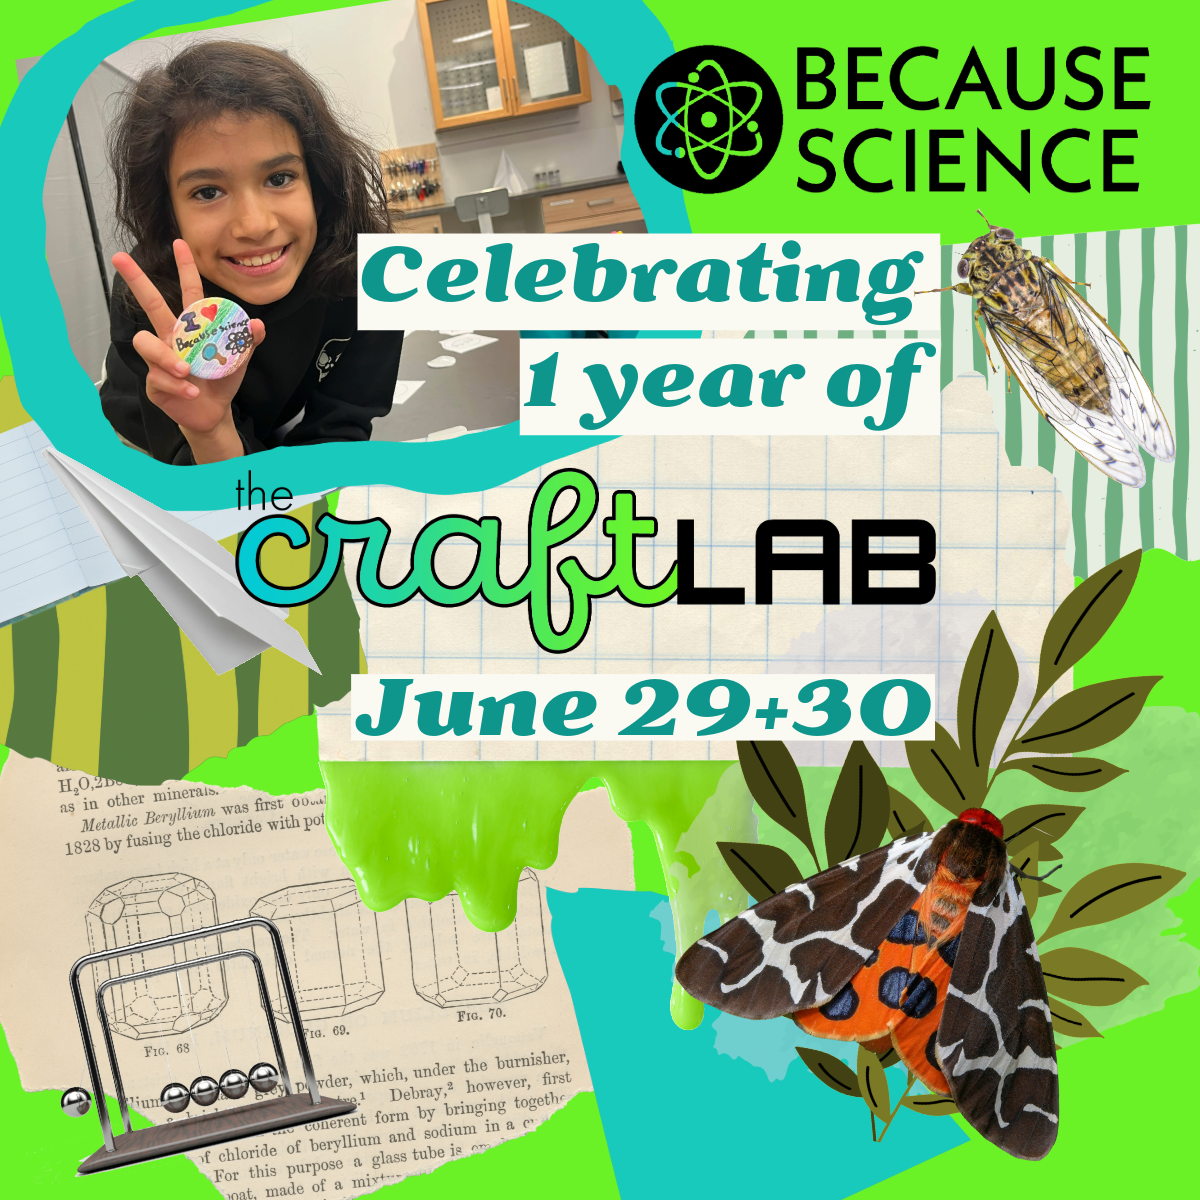 One Year Craft Lab Celebration - June 29+30 - Hands-on science, Contests, and More!